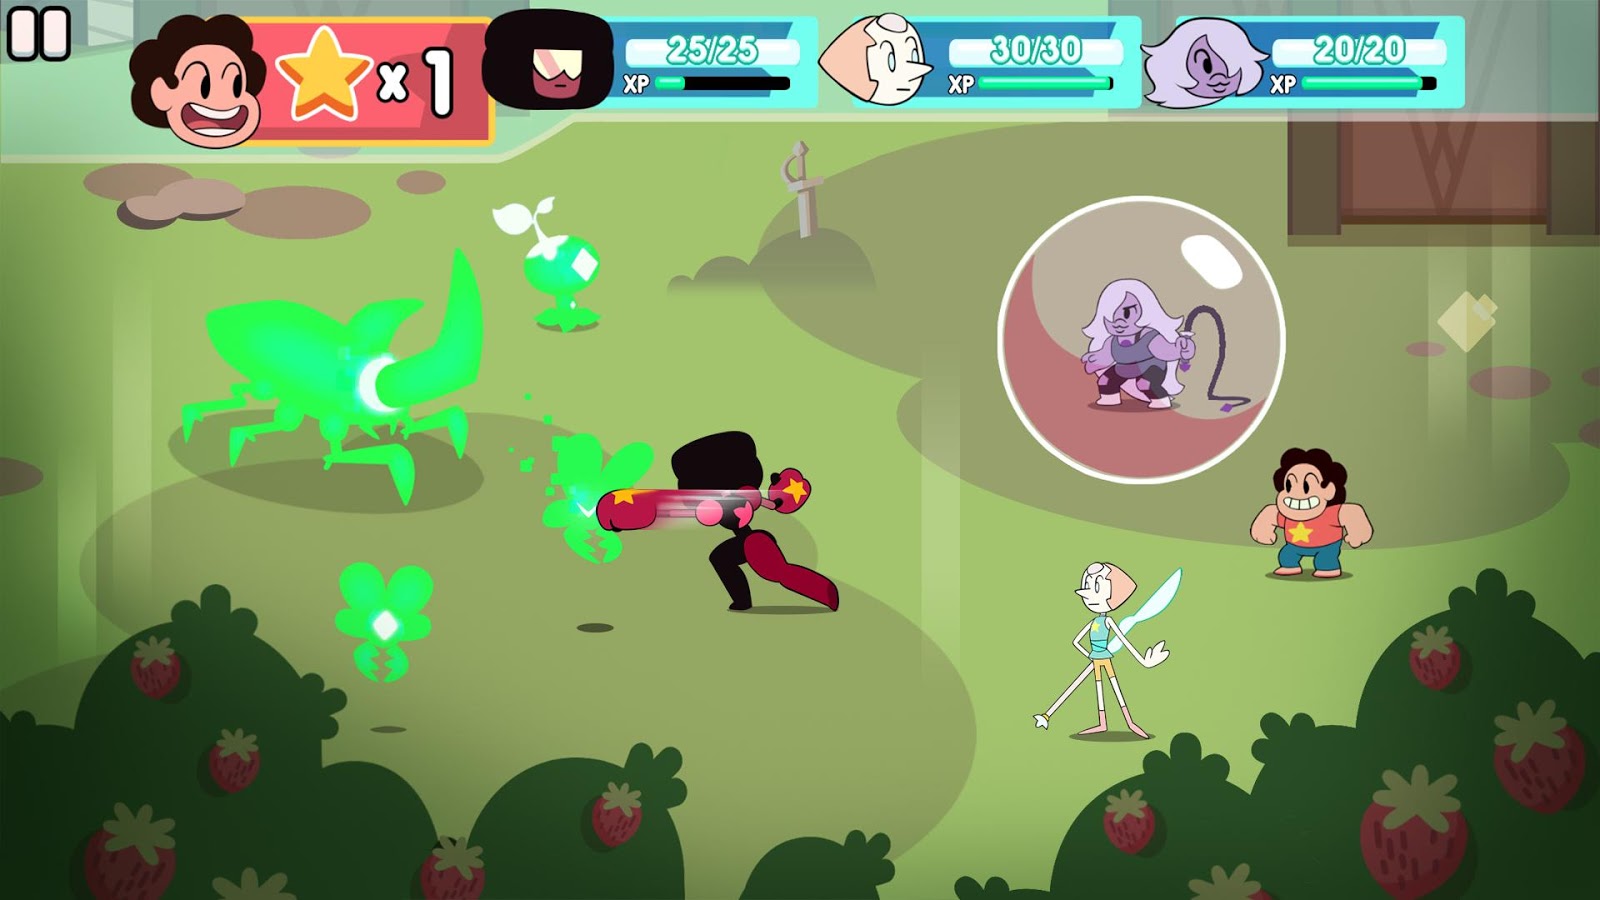 A femme looking person with large boxing gloves punching a glowing creature. Another femme looking person holding a whip stands in a bubble. A masc looking person and a femme looking person holding a sword. Several glowing creatures approach.